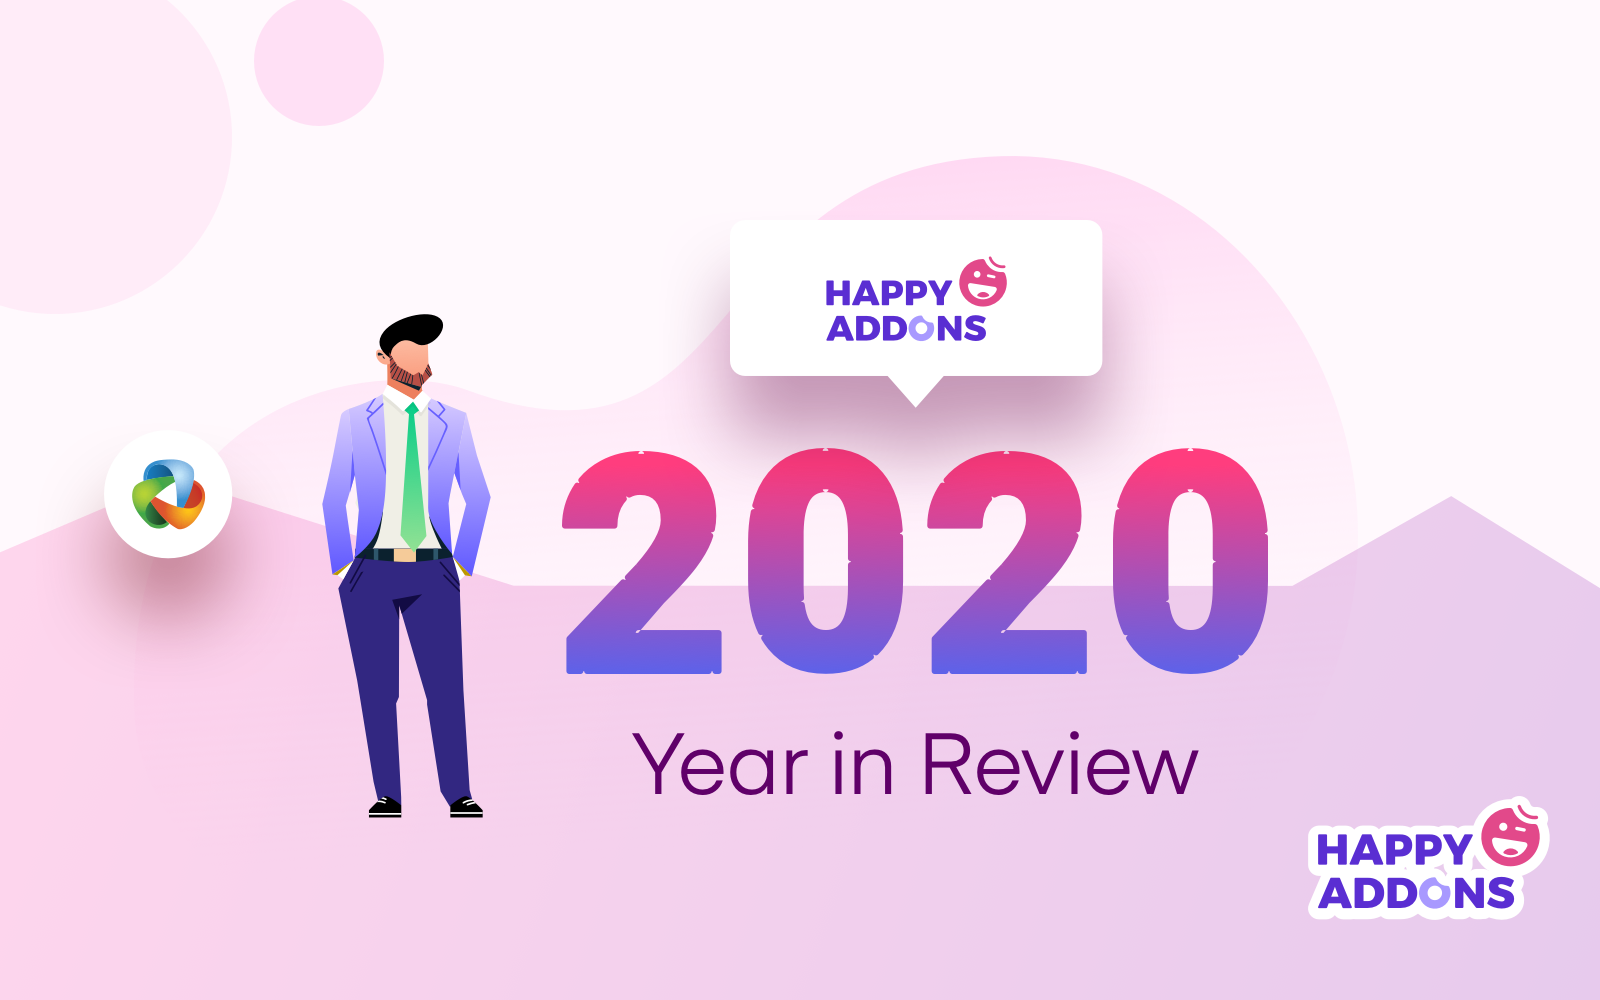 HappyAddons Year in Review